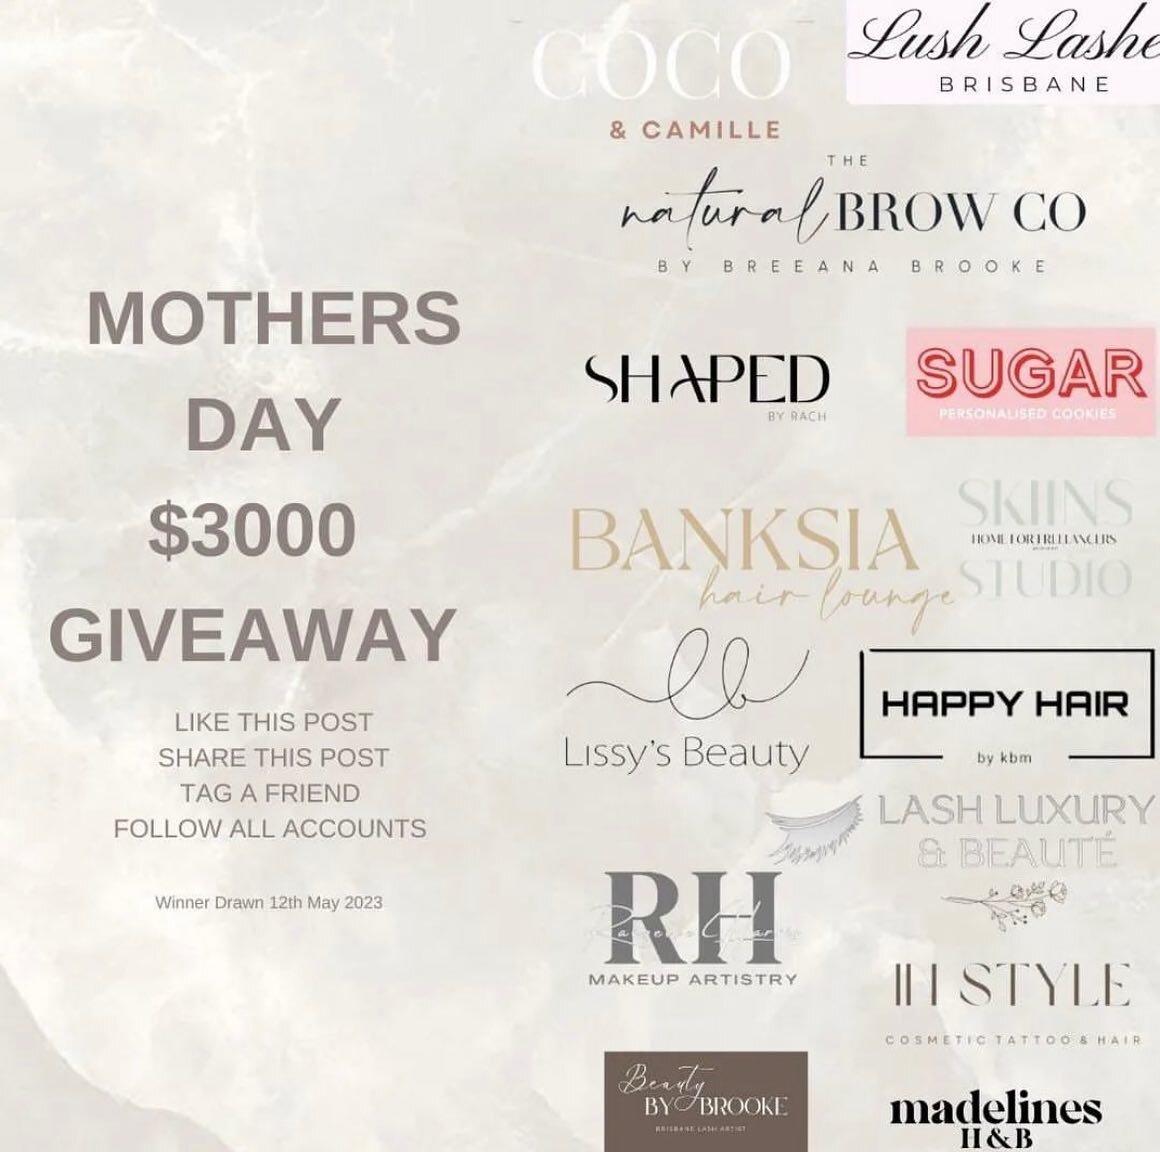 WIN over $3000 for our Mothers Day Giveaway ✨🤍

To celebrate all Mums this Mother&rsquo;s Day, we have collaborated with a group of North Brisbane Businesses to bring one lucky Special Person over $3000 worth of prizes this Mothers Day. (You must fo